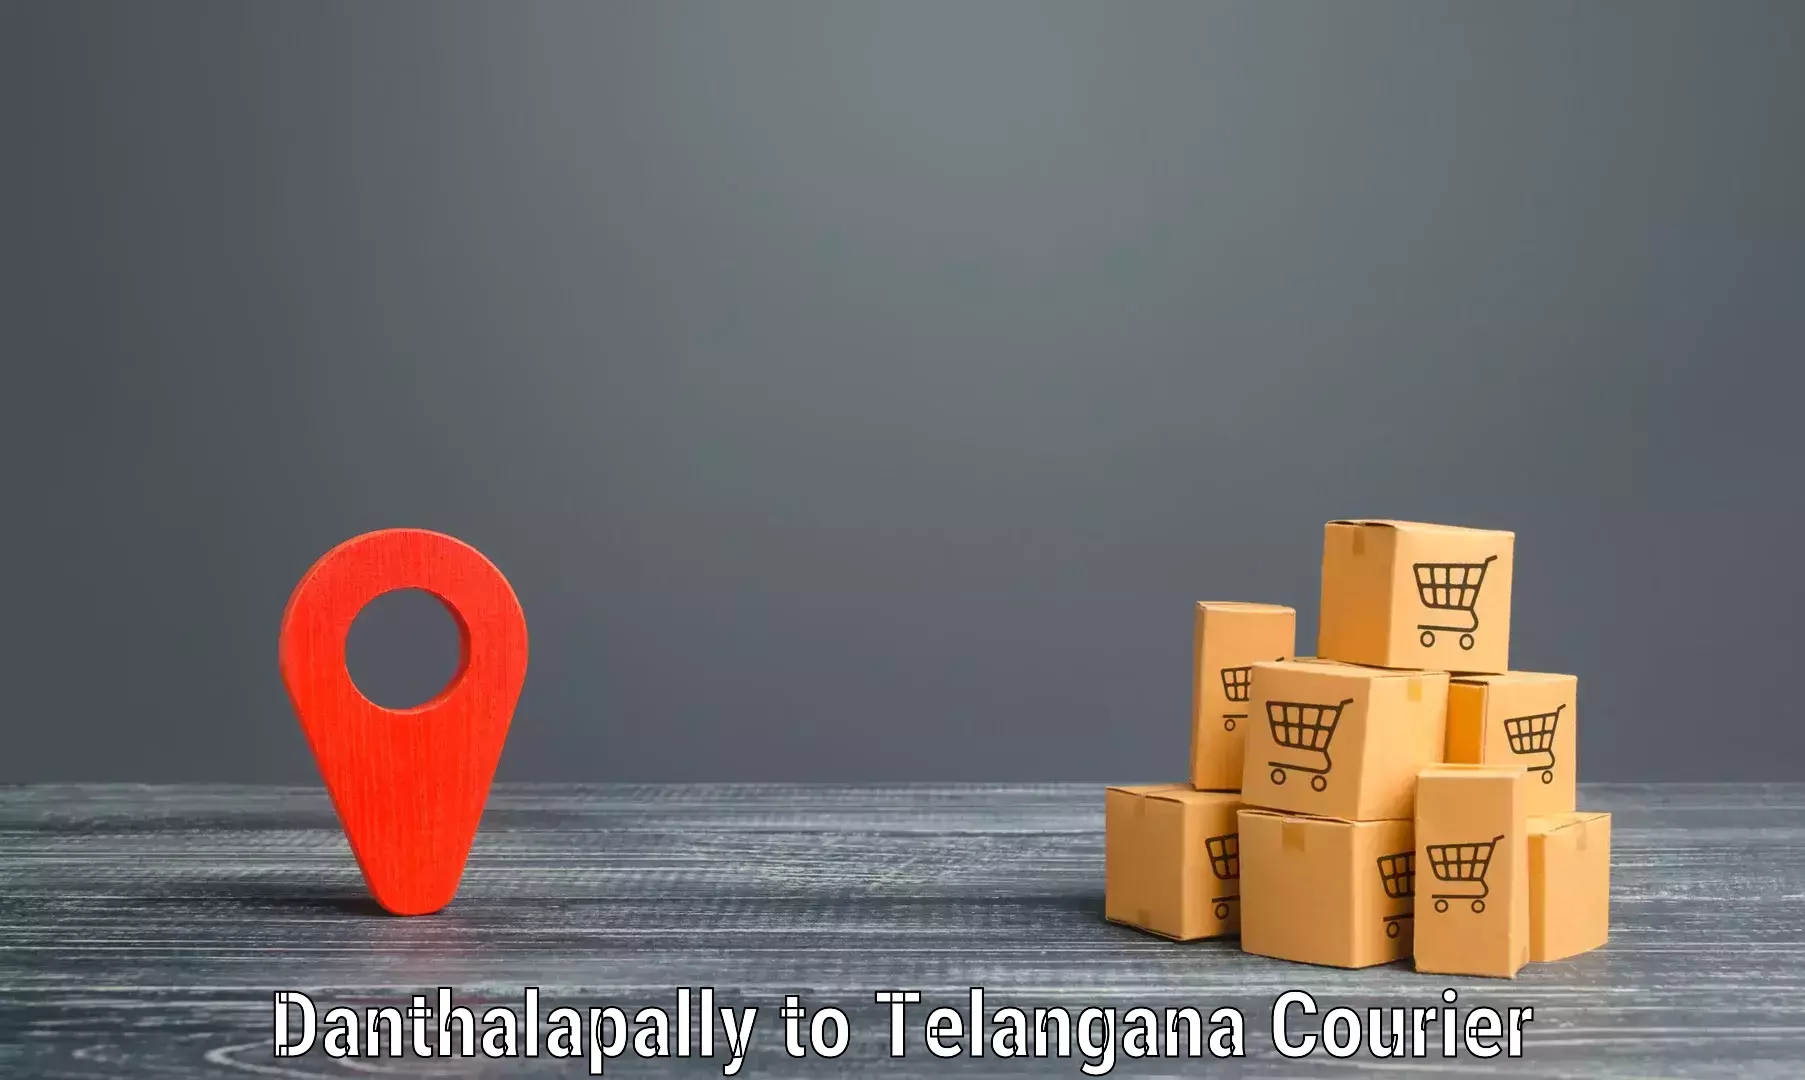 Multi-service courier options Danthalapally to Wanaparthy